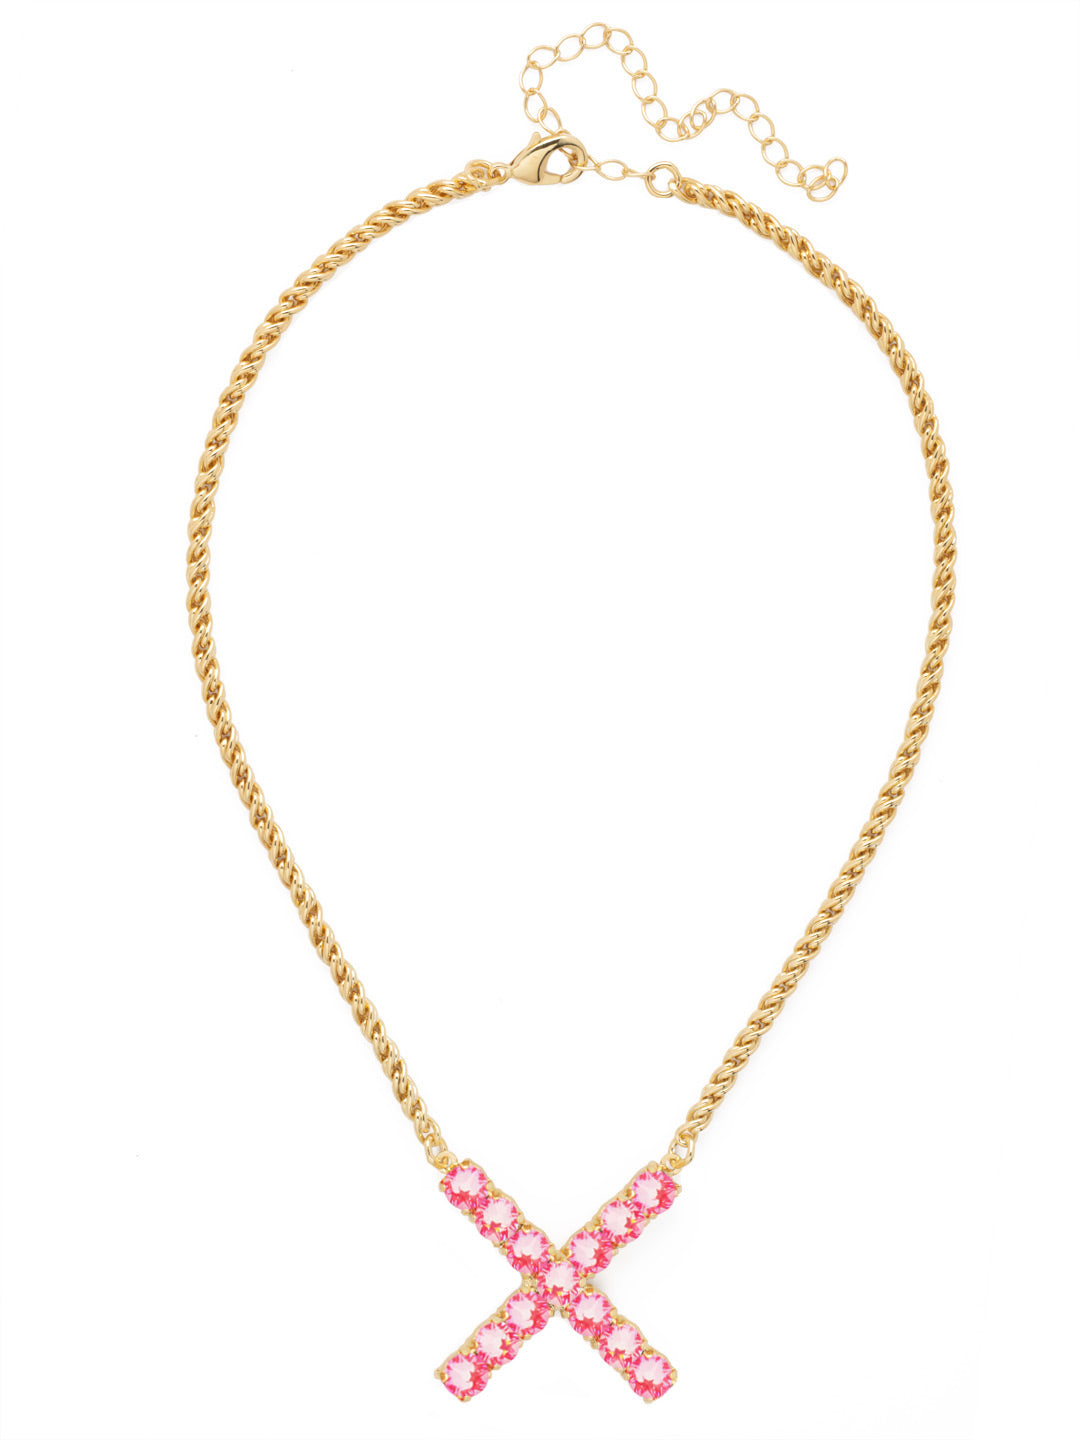 X Initial Rope Pendant Necklace - NFK43BGETP - <p>The Initial Rope Pendant Necklace features a crystal encrusted metal monogram pendant on an adjustable rope chain, secured with a lobster claw clasp. From Sorrelli's Electric Pink collection in our Bright Gold-tone finish.</p>